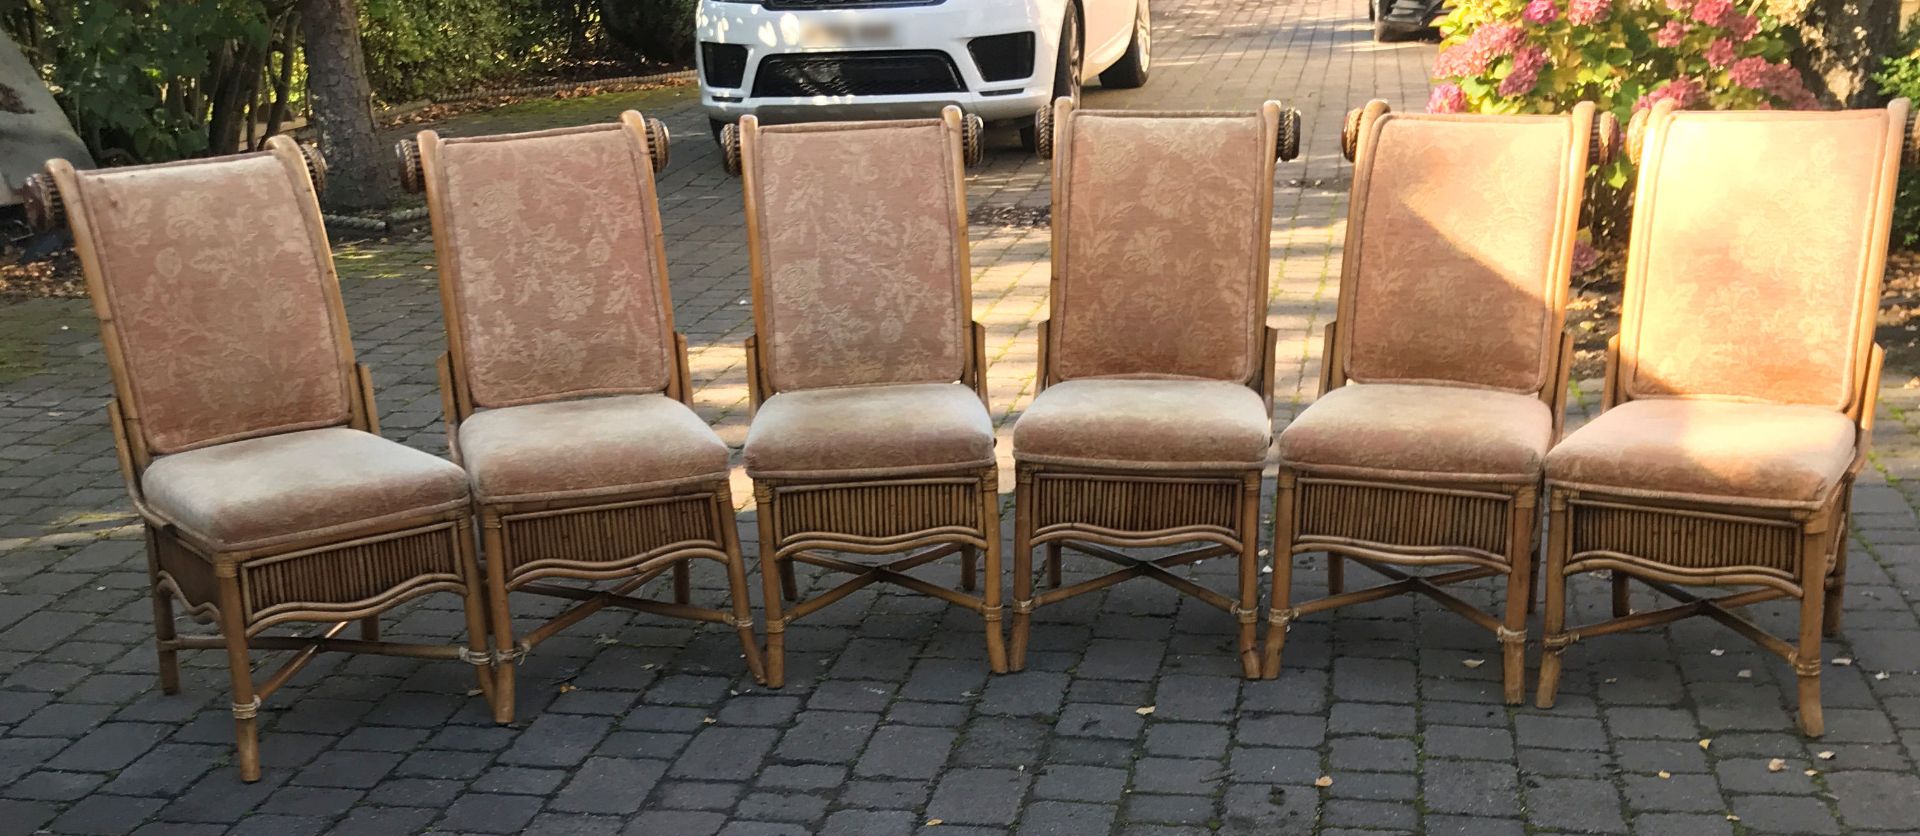 A Set Of 6 x Matching Upholstered High Back Bamboo Chairs - In Very Good Condition - CL535 - Ref: UN